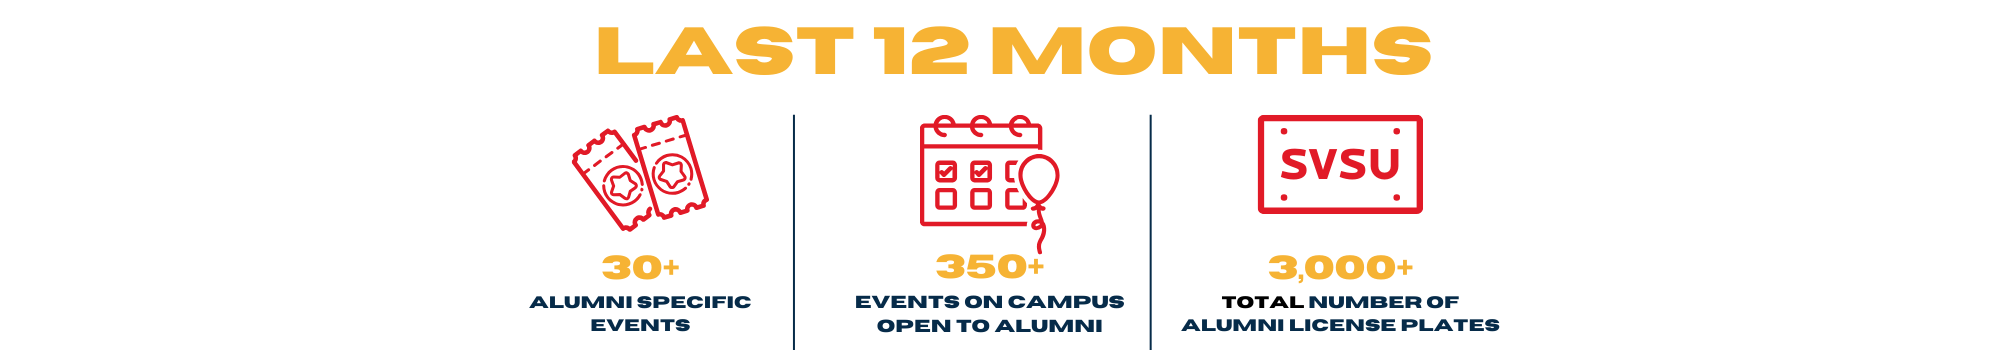 in the last 12 months there have been 30+ alumni specific events, 350+ events on campus open to alumni. There is over 3000 total number of SVSU license plates